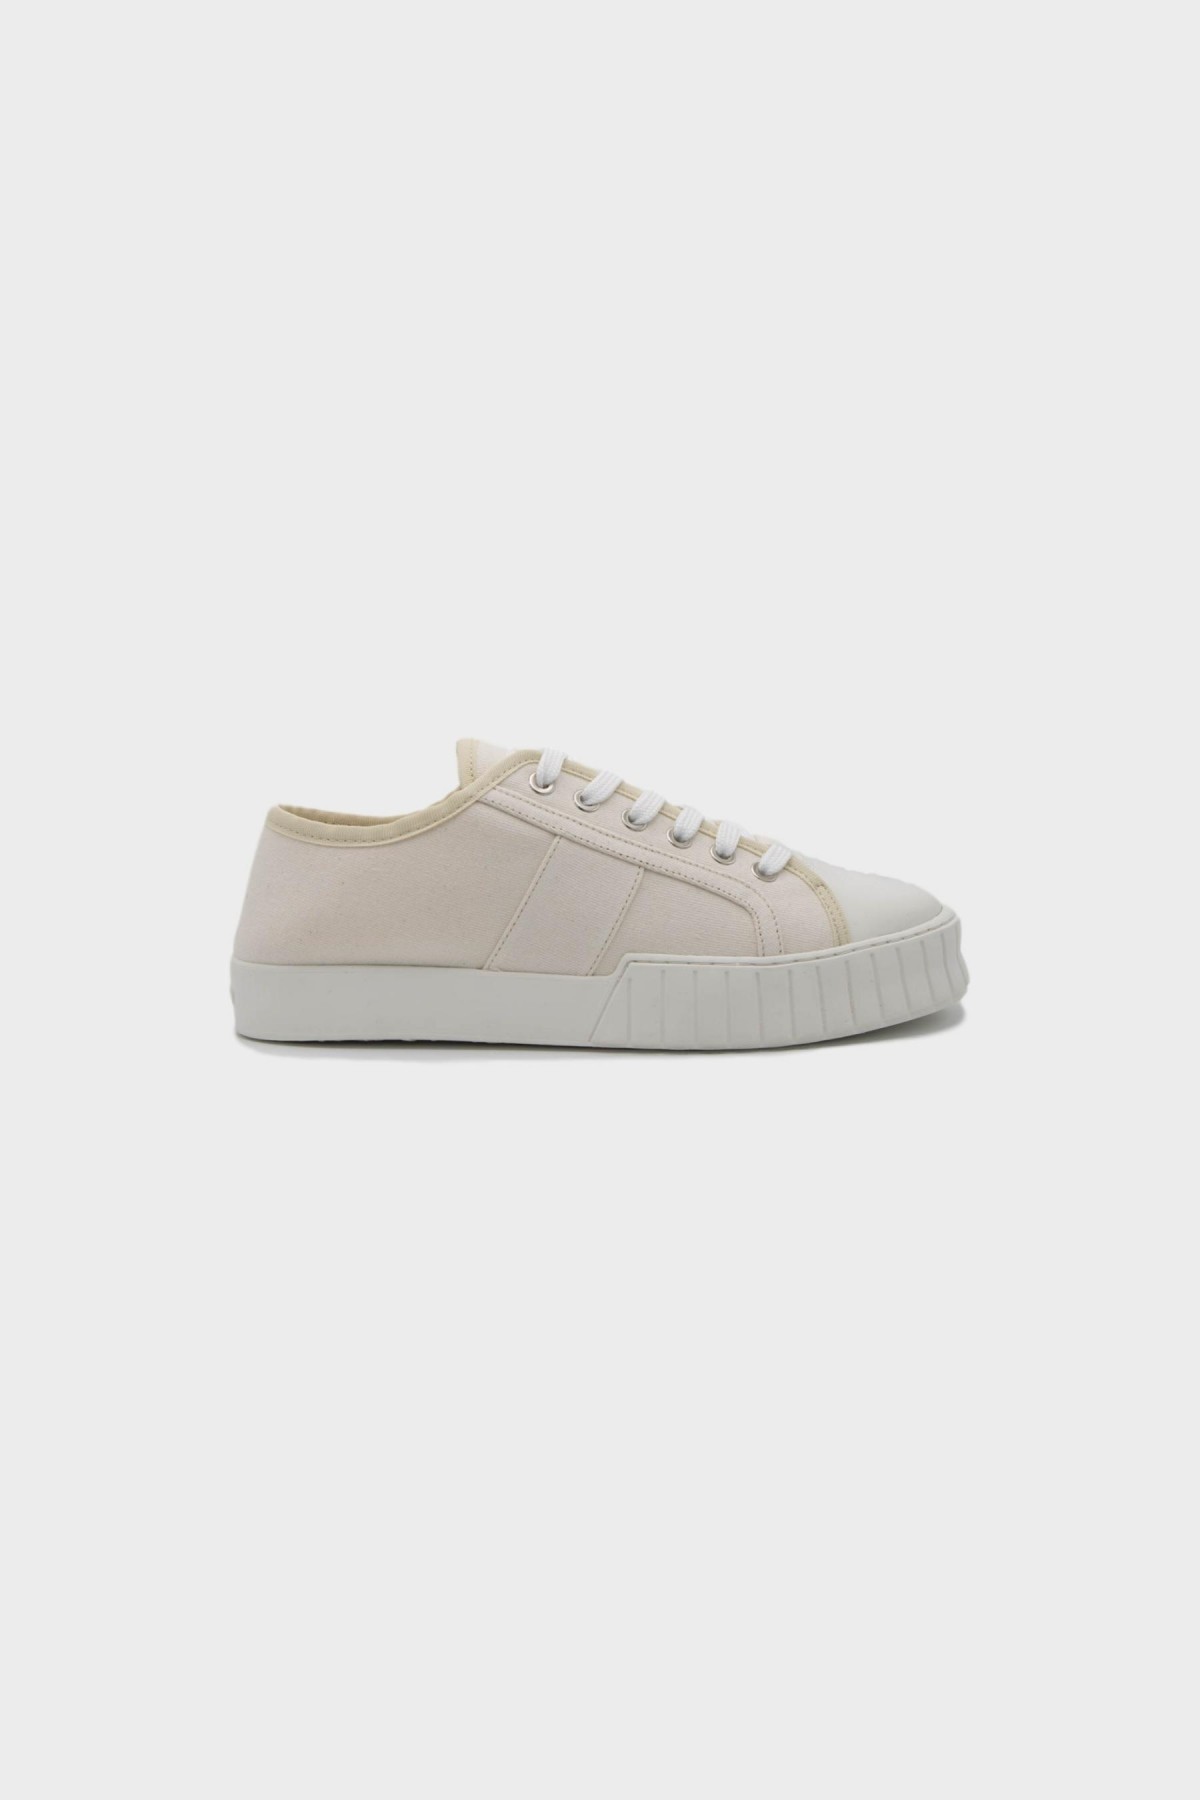 Primury Divid Recycled Canvas in White Sole